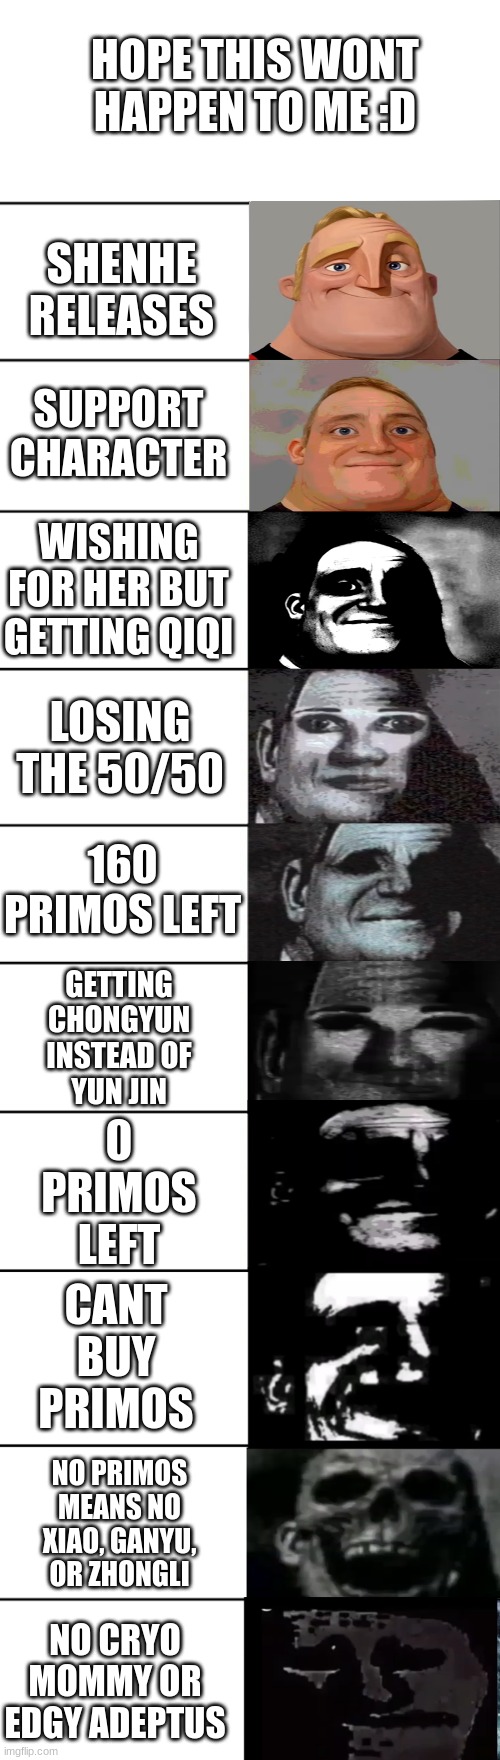 also-im too lazy to spend 5 days completing quests for primos | HOPE THIS WONT HAPPEN TO ME :D; SHENHE RELEASES; SUPPORT CHARACTER; WISHING FOR HER BUT GETTING QIQI; LOSING THE 50/50; 160 PRIMOS LEFT; GETTING CHONGYUN INSTEAD OF YUN JIN; 0 PRIMOS LEFT; CANT BUY PRIMOS; NO PRIMOS MEANS NO XIAO, GANYU, OR ZHONGLI; NO CRYO MOMMY OR EDGY ADEPTUS | image tagged in mr incredible becoming uncanny,genshin impact,pain,shenhe and xiao,ganyu and zhongli,yun jin | made w/ Imgflip meme maker